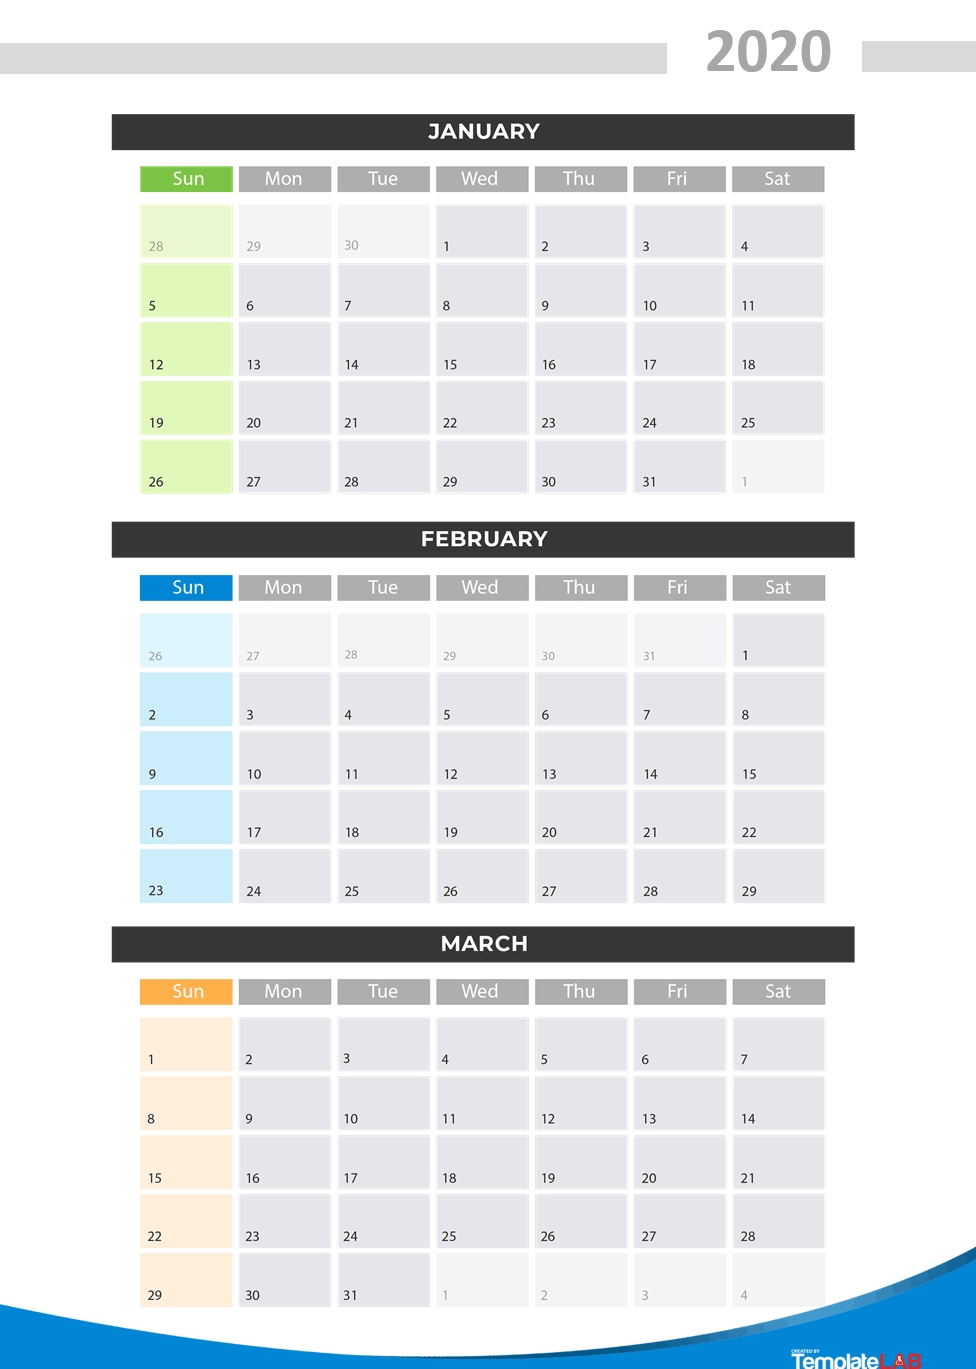 2020 Printable Calendars [Monthly, With Holidays, Yearly] ᐅ with 2020 Quarterly Calendar Printable Free